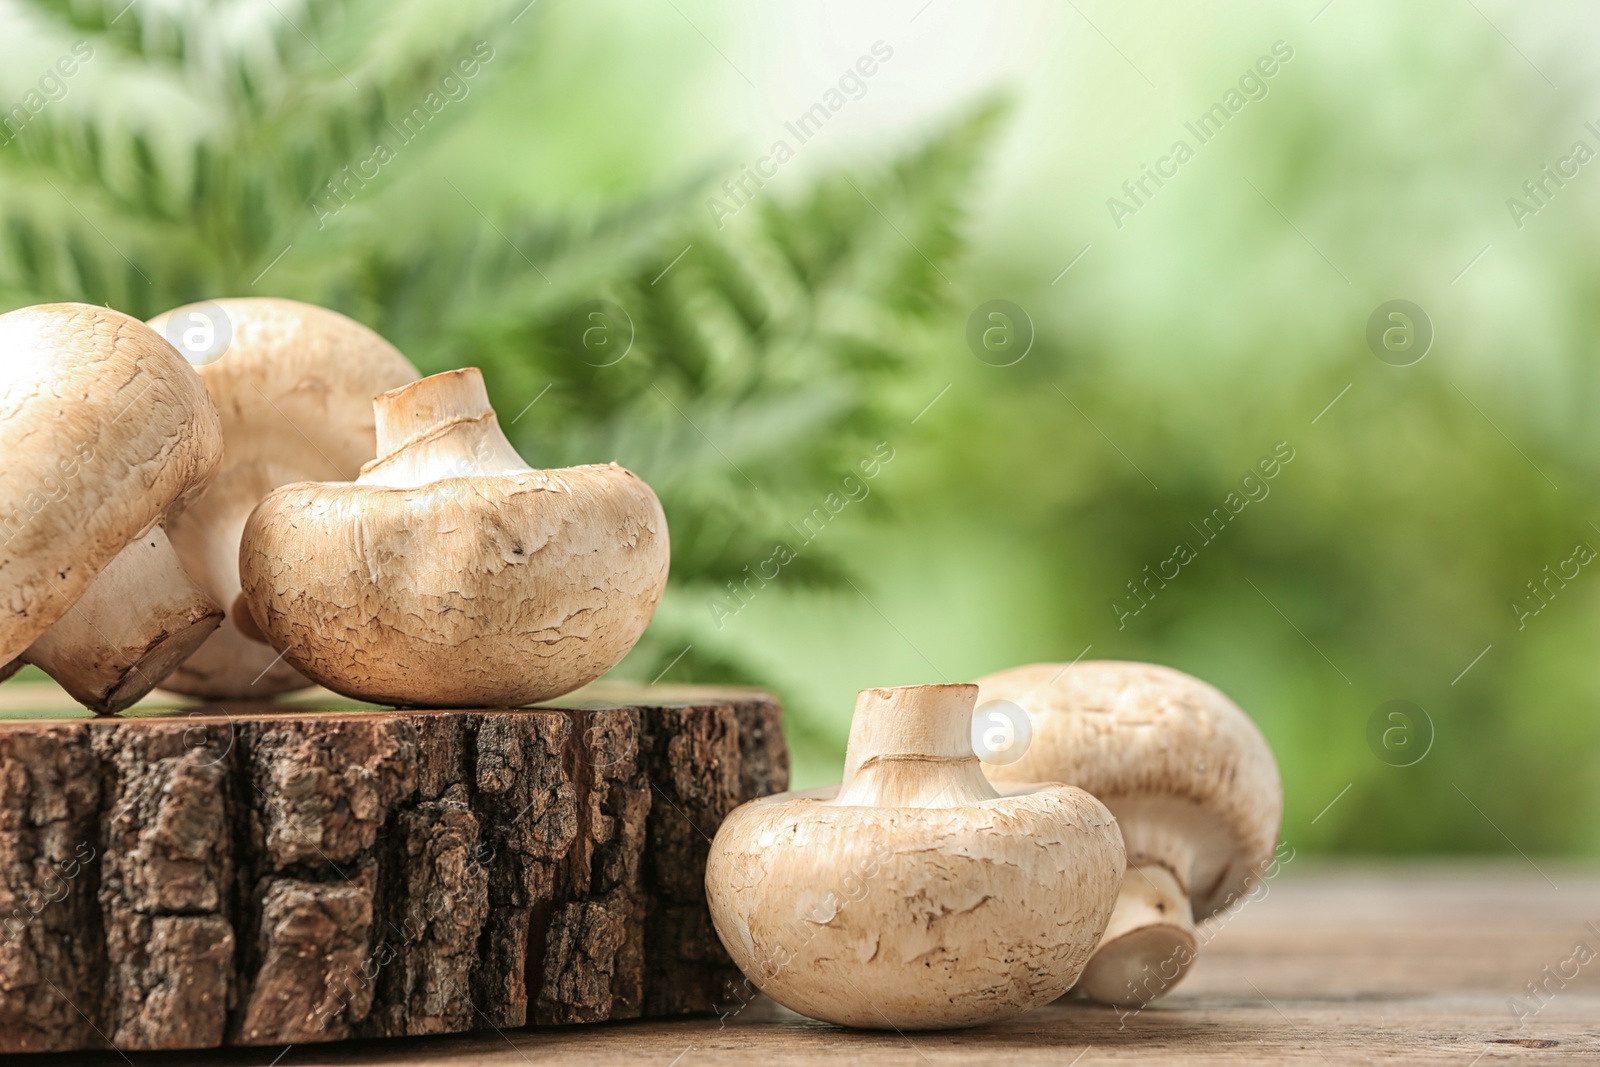 Photo of Fresh champignon mushrooms with wooden stump on blurred background, closeup